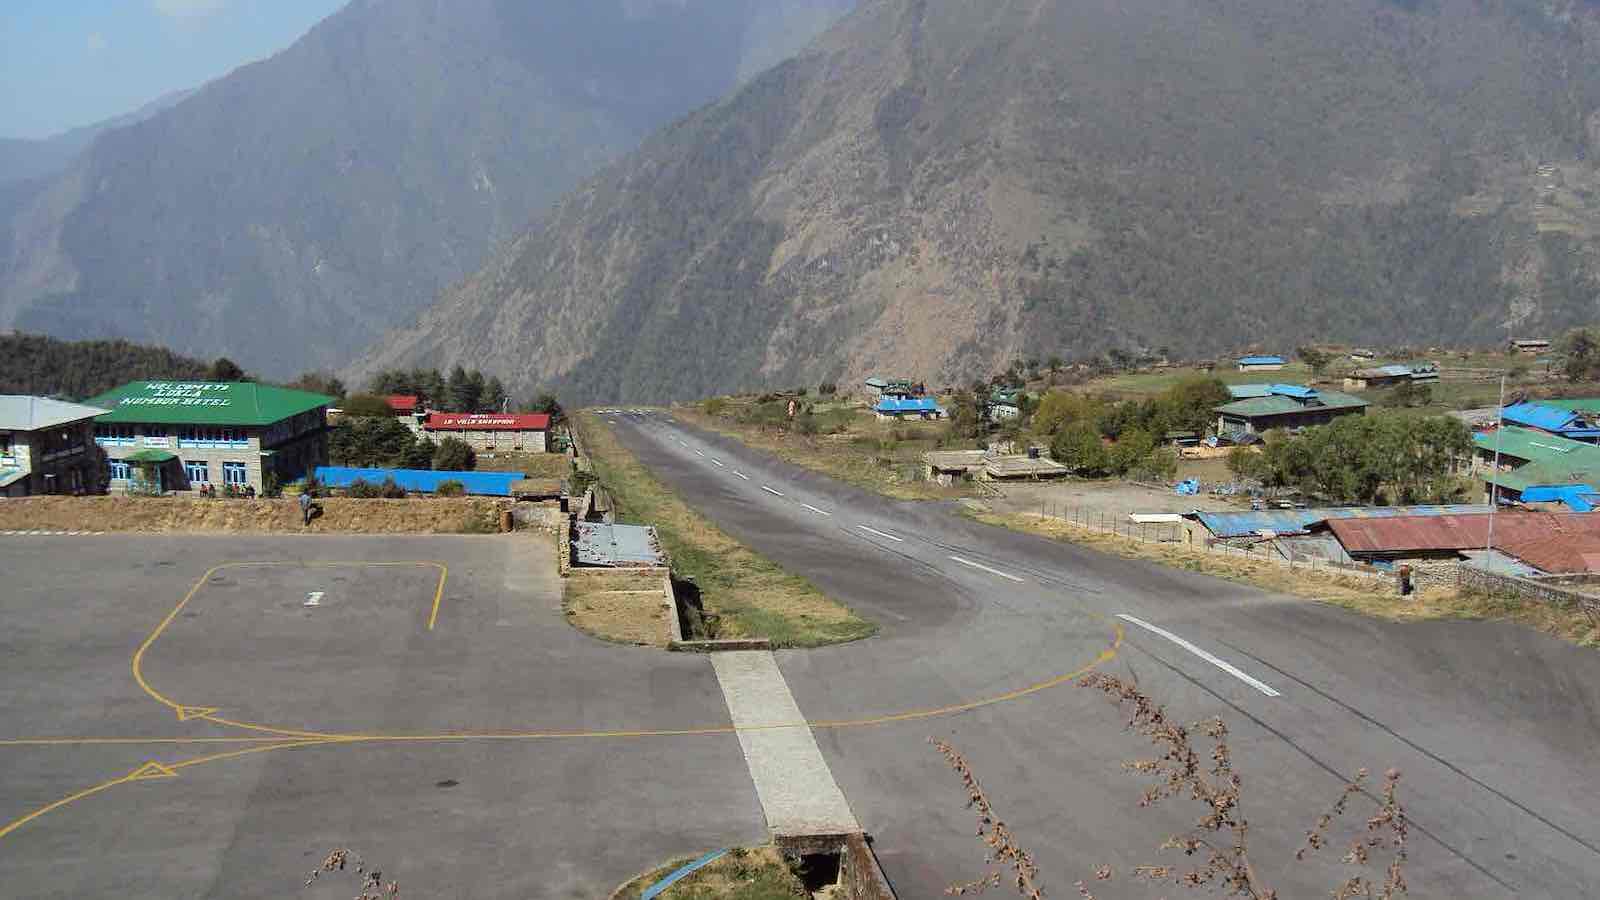 Lukla airport, photo courtesy of wikipedia. I was too stressed about my flight to think about taking many photos.